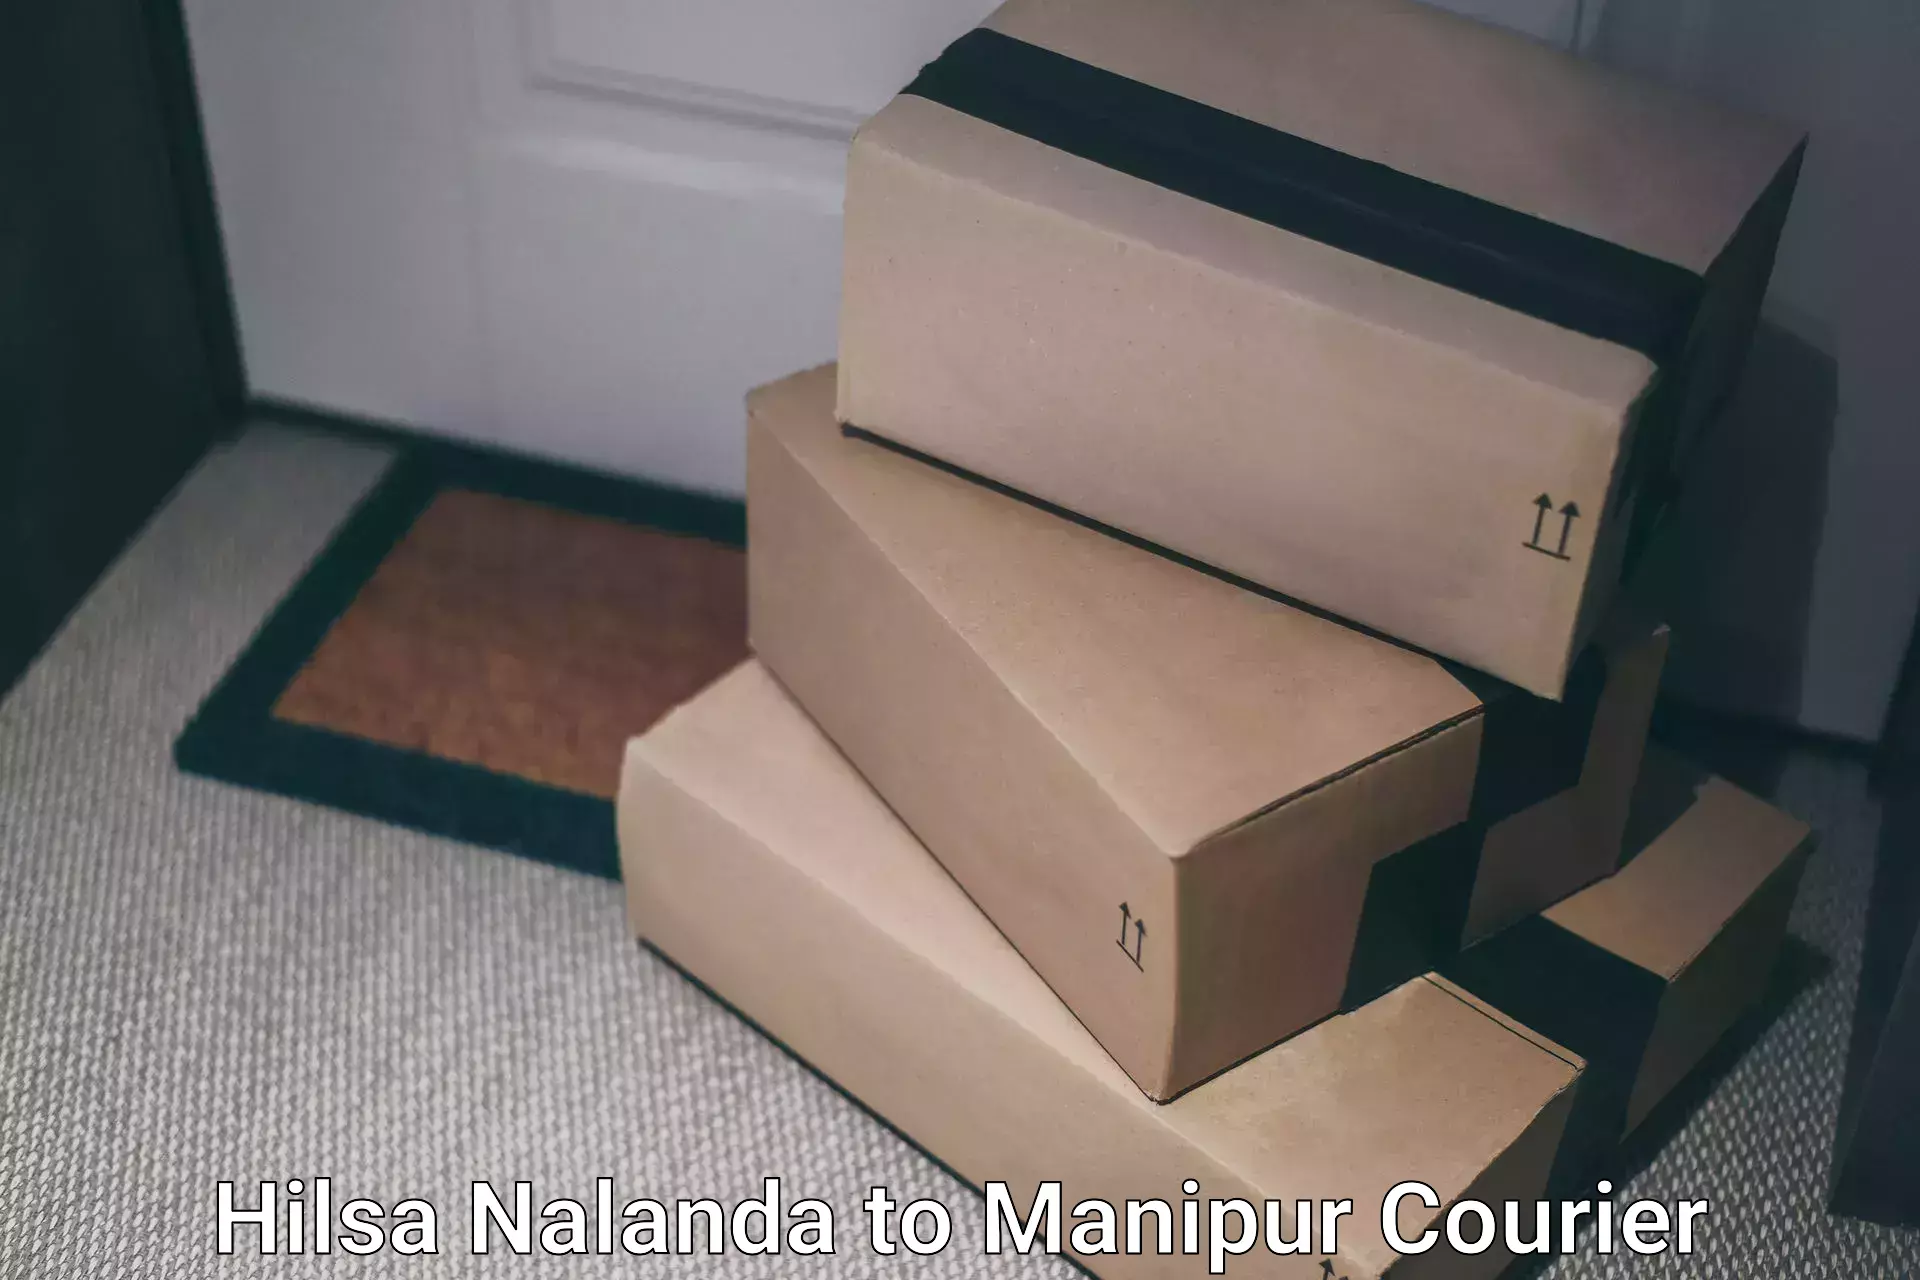 Same-day delivery options in Hilsa Nalanda to Manipur